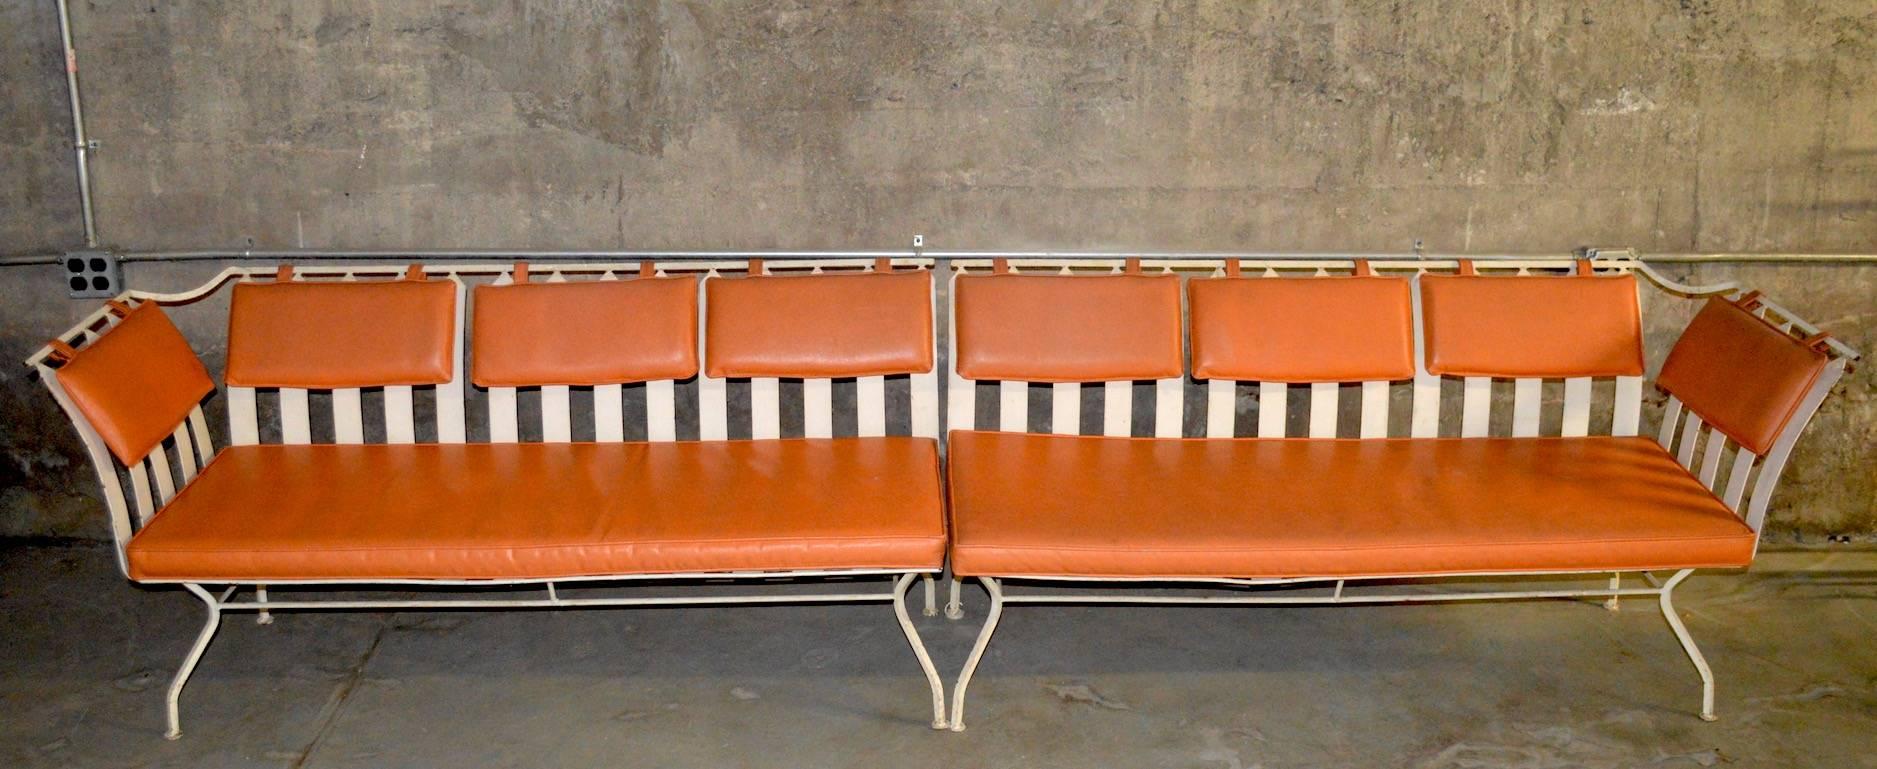 Great extra long two-piece sectional sofa attributed to the Woodard Furniture Company. This sophisticated even arm sofa has metal strapping as the seat and back support, on a metal superstructure, The cushions are orange vinyl, which are useable as